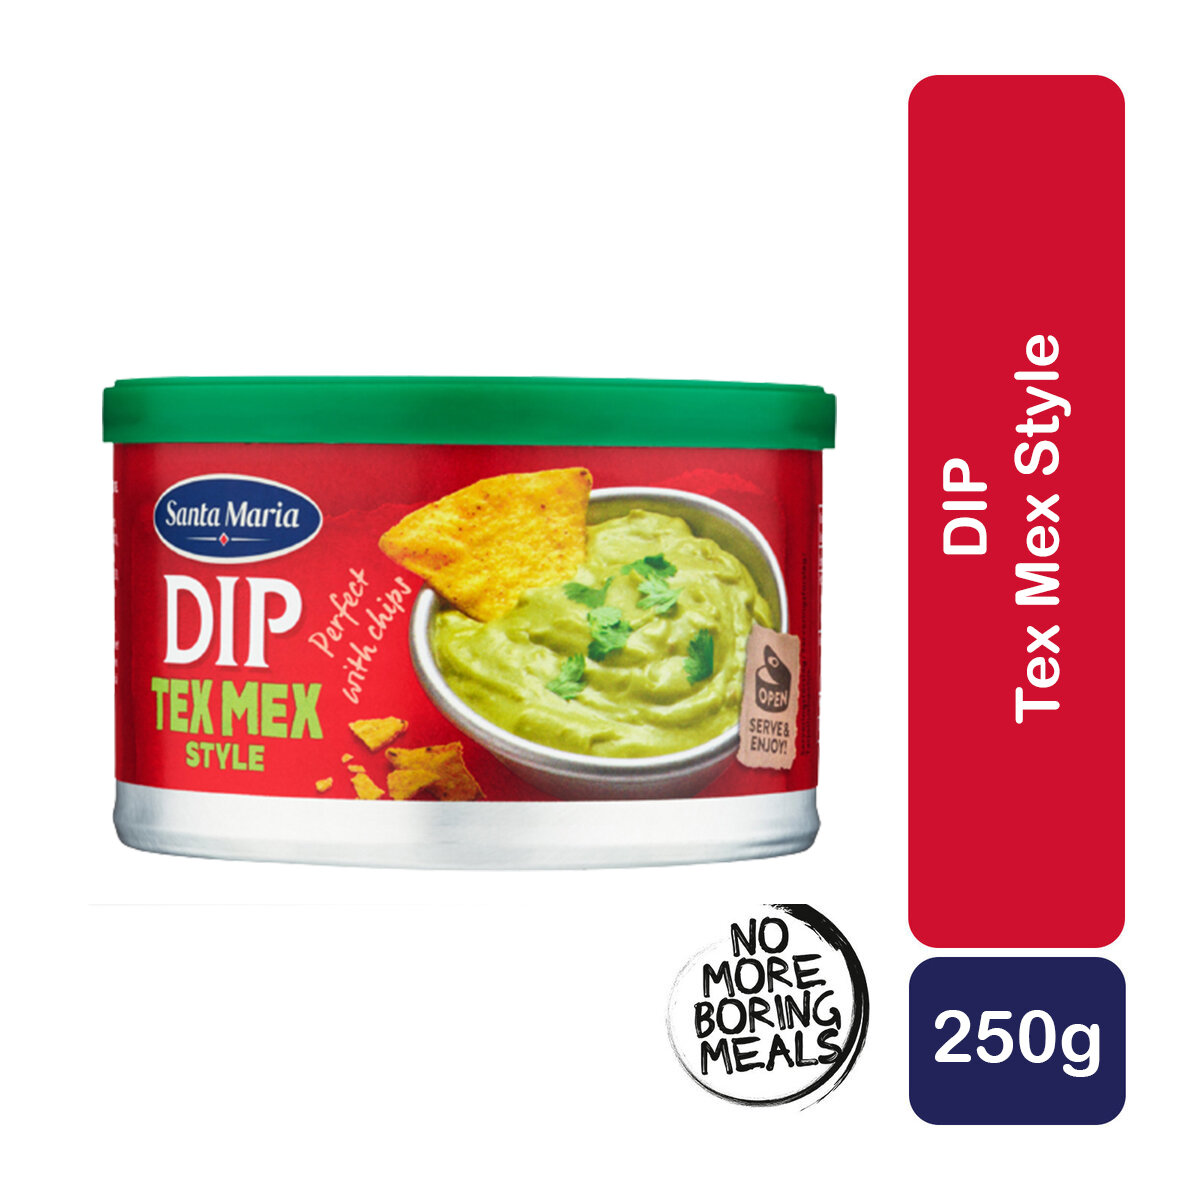 Dip Tex Mex Style 250g (Best before: 3 Aug 2025)